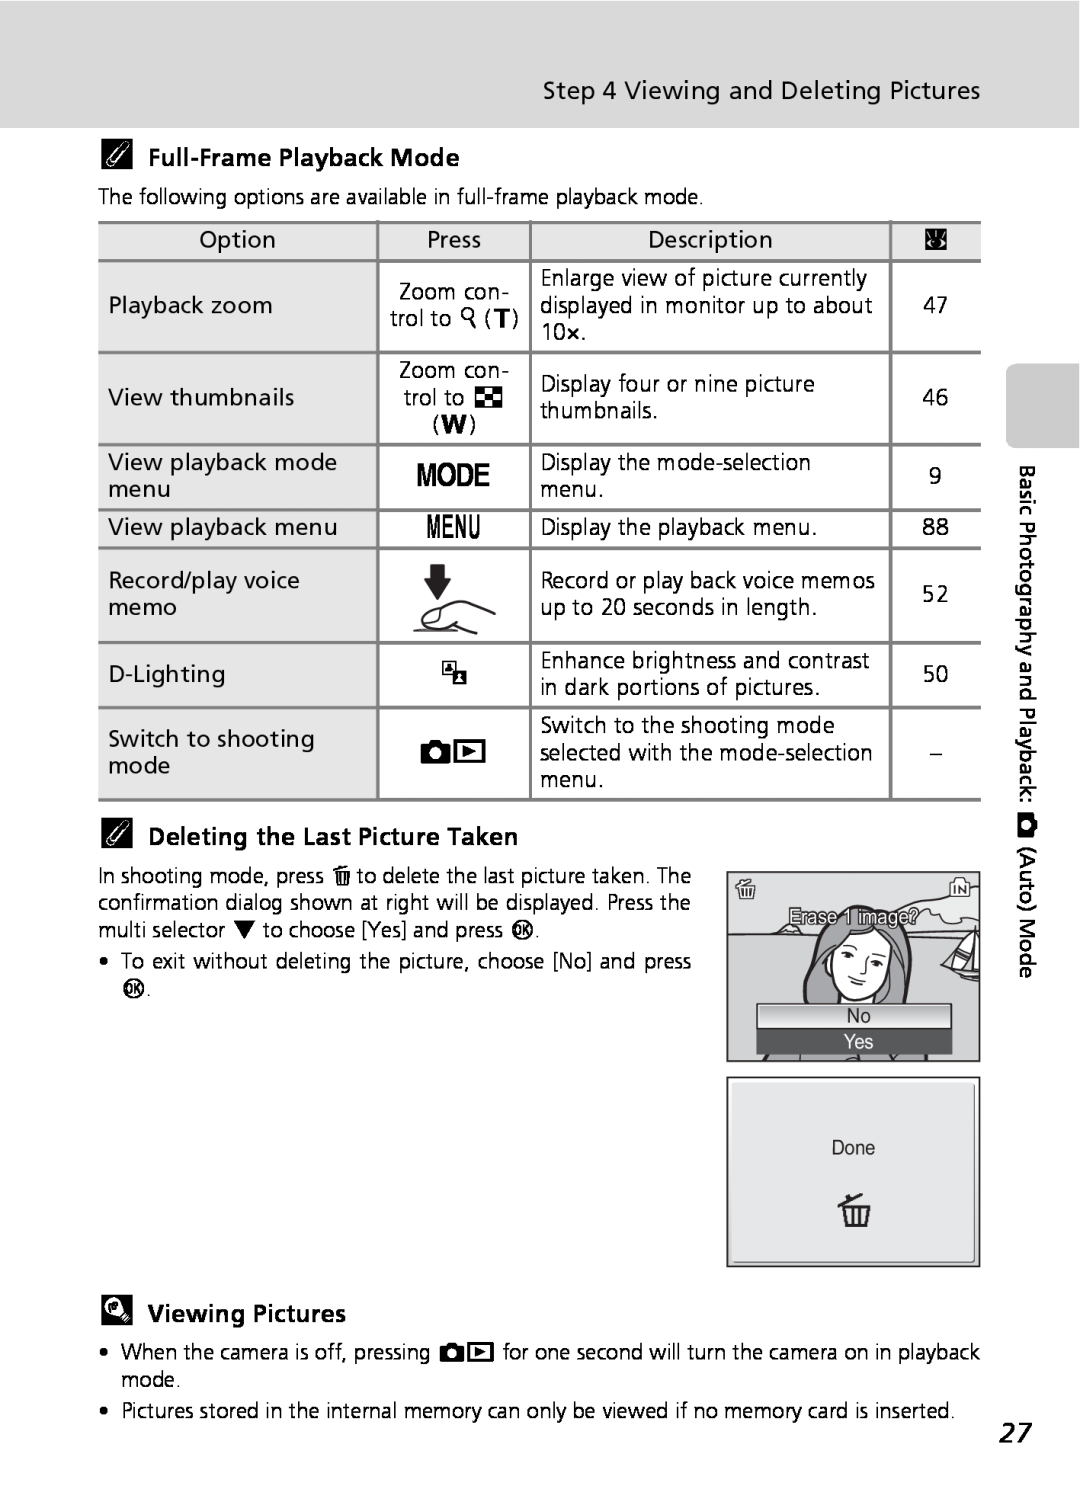 Nikon COOLPIXS9 manual kFull-FramePlayback Mode, lViewing Pictures, Viewing and Deleting Pictures 